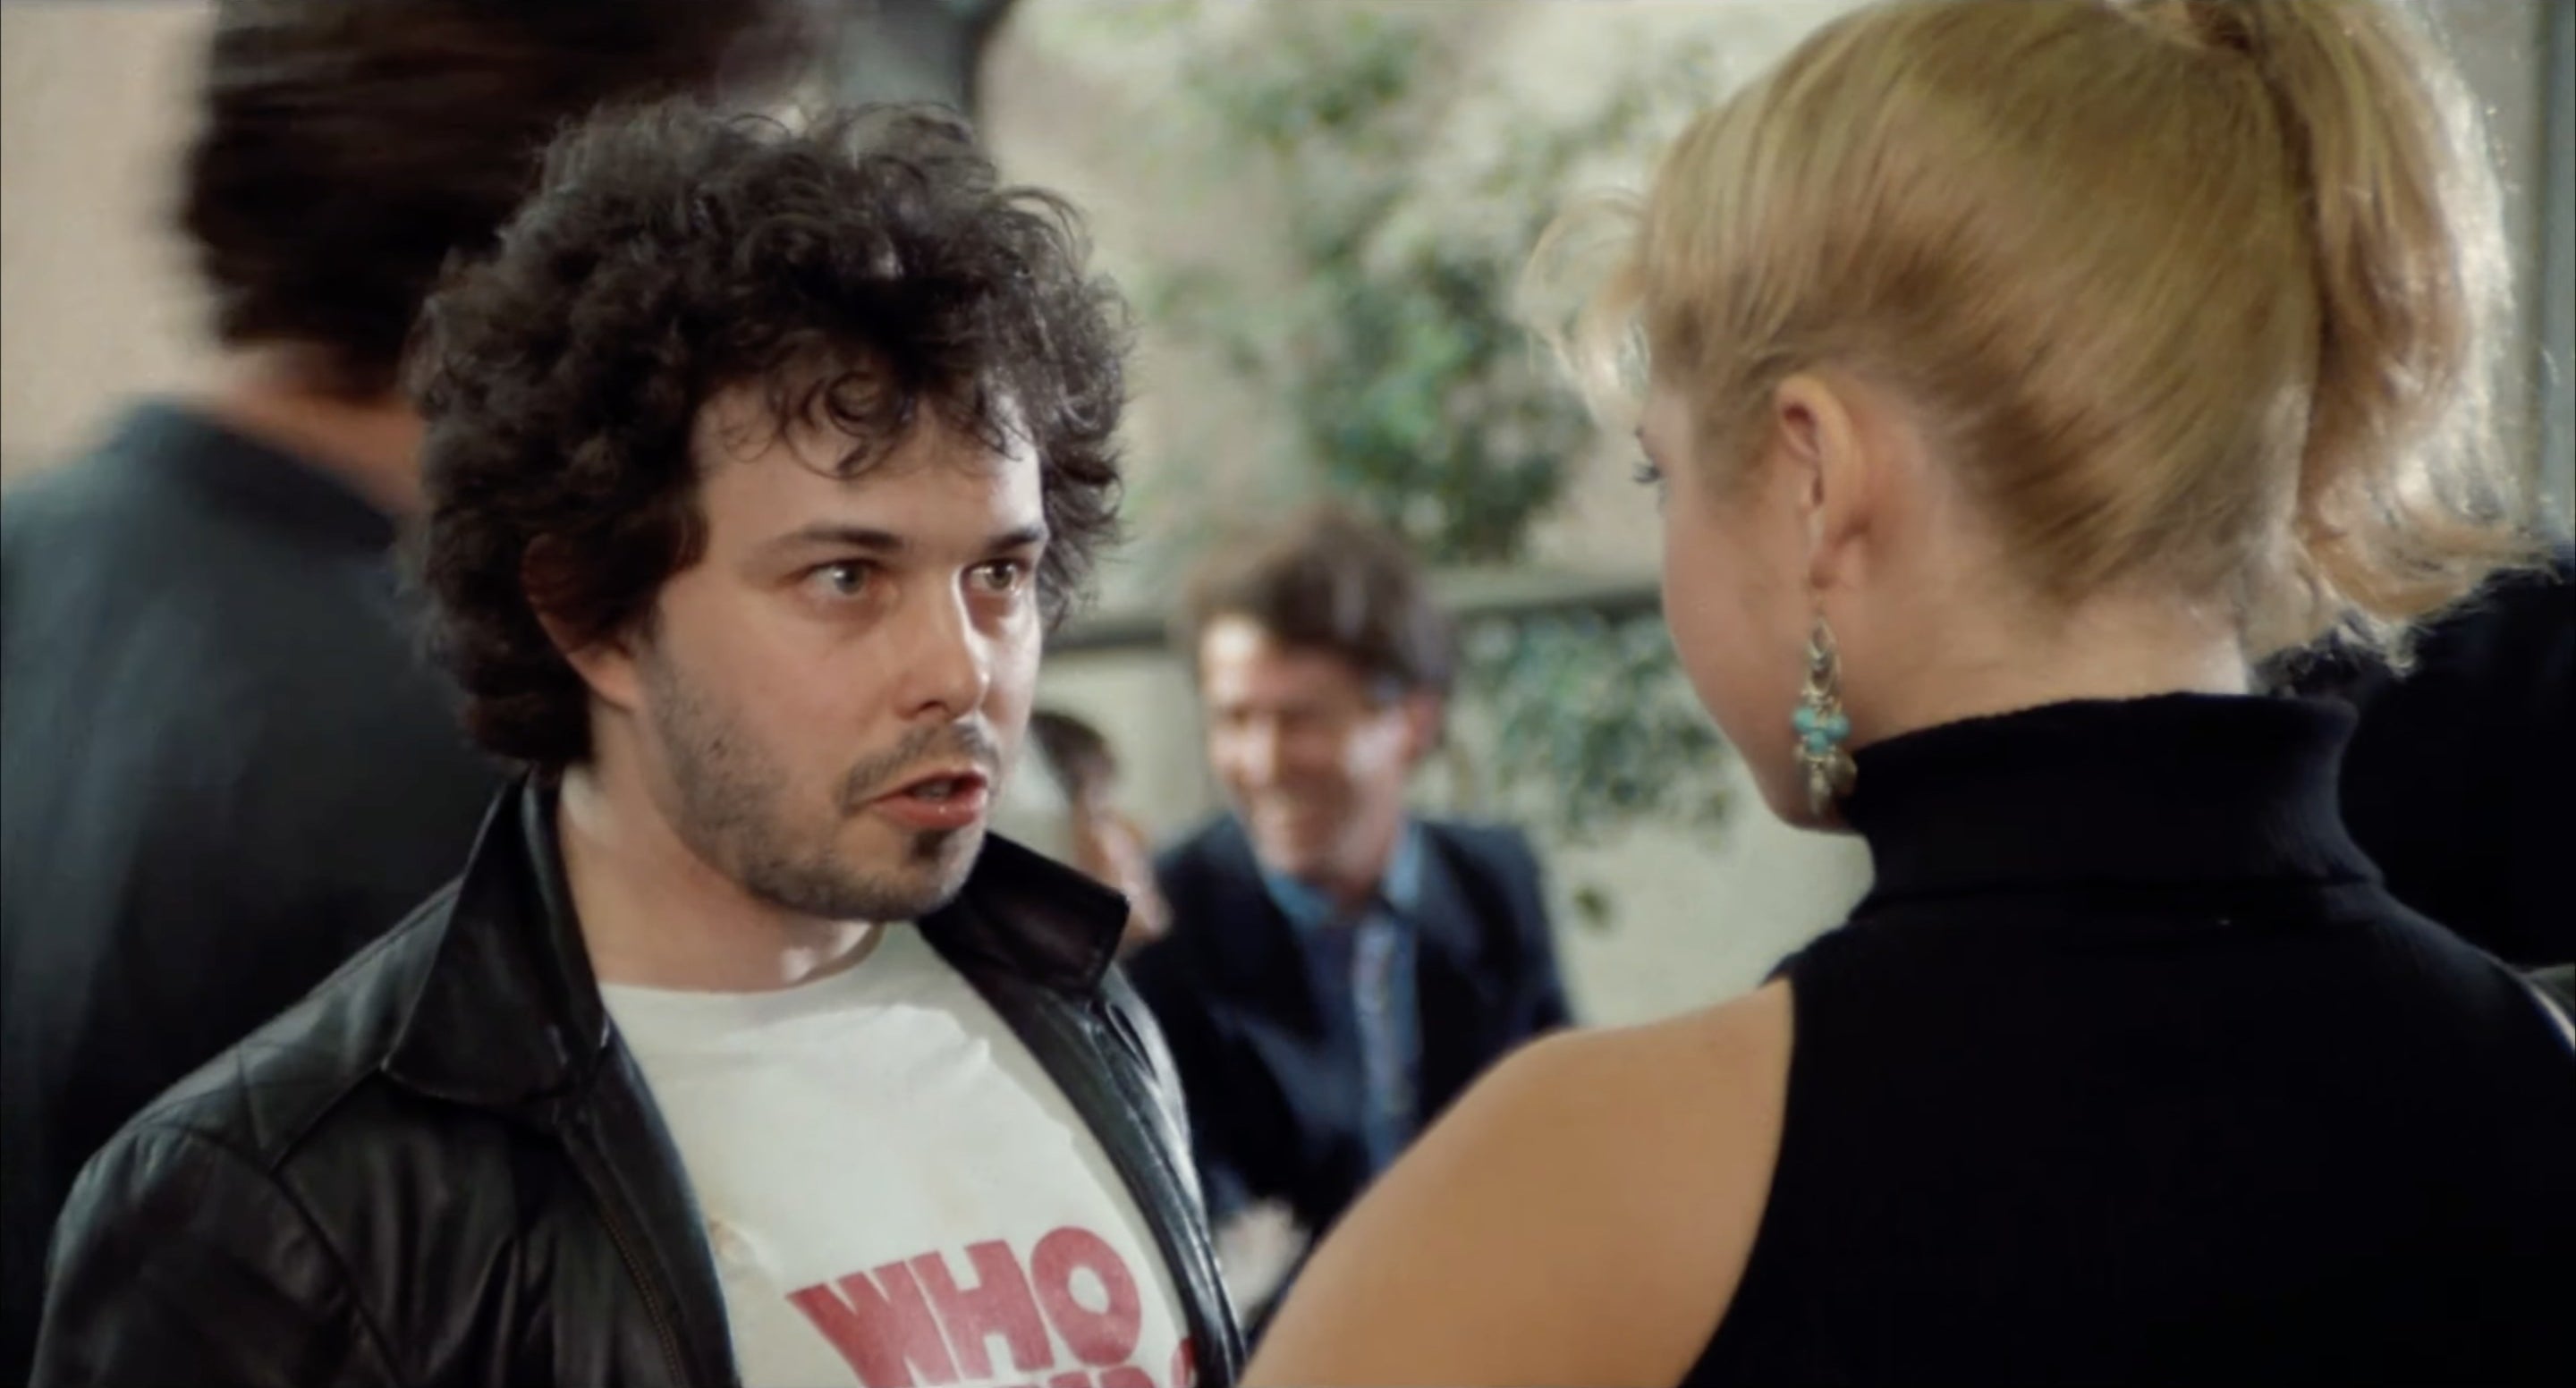 Man staring at woman in &quot;Revenge of the Nerds II&quot;